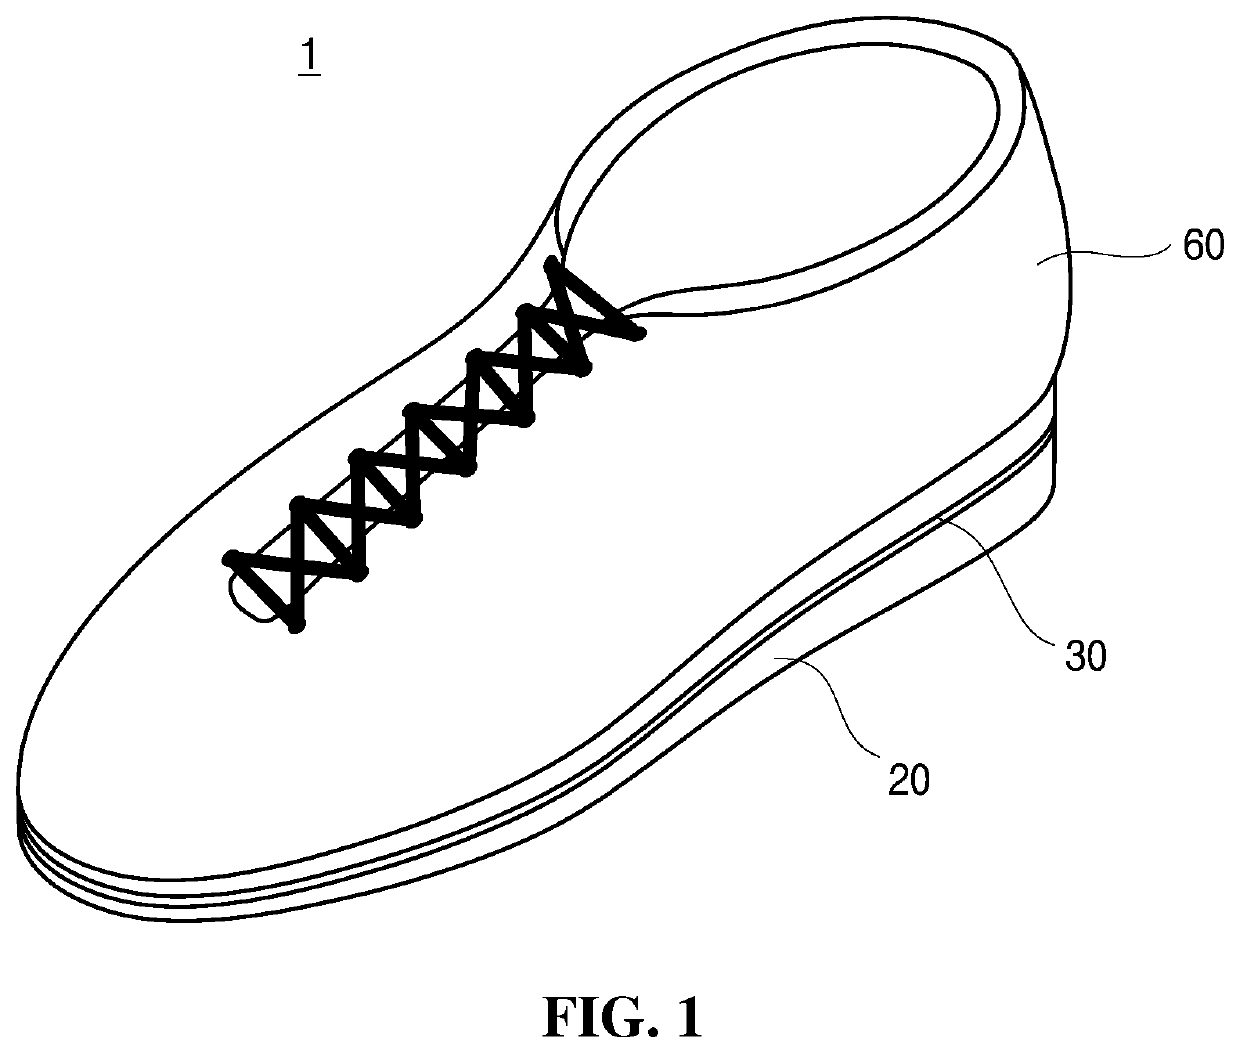 Customized shoe for preventing diabetes, preventing diabetic foot due to complications of diabetes, and alleviating pain from diabetic necrotic ulceration